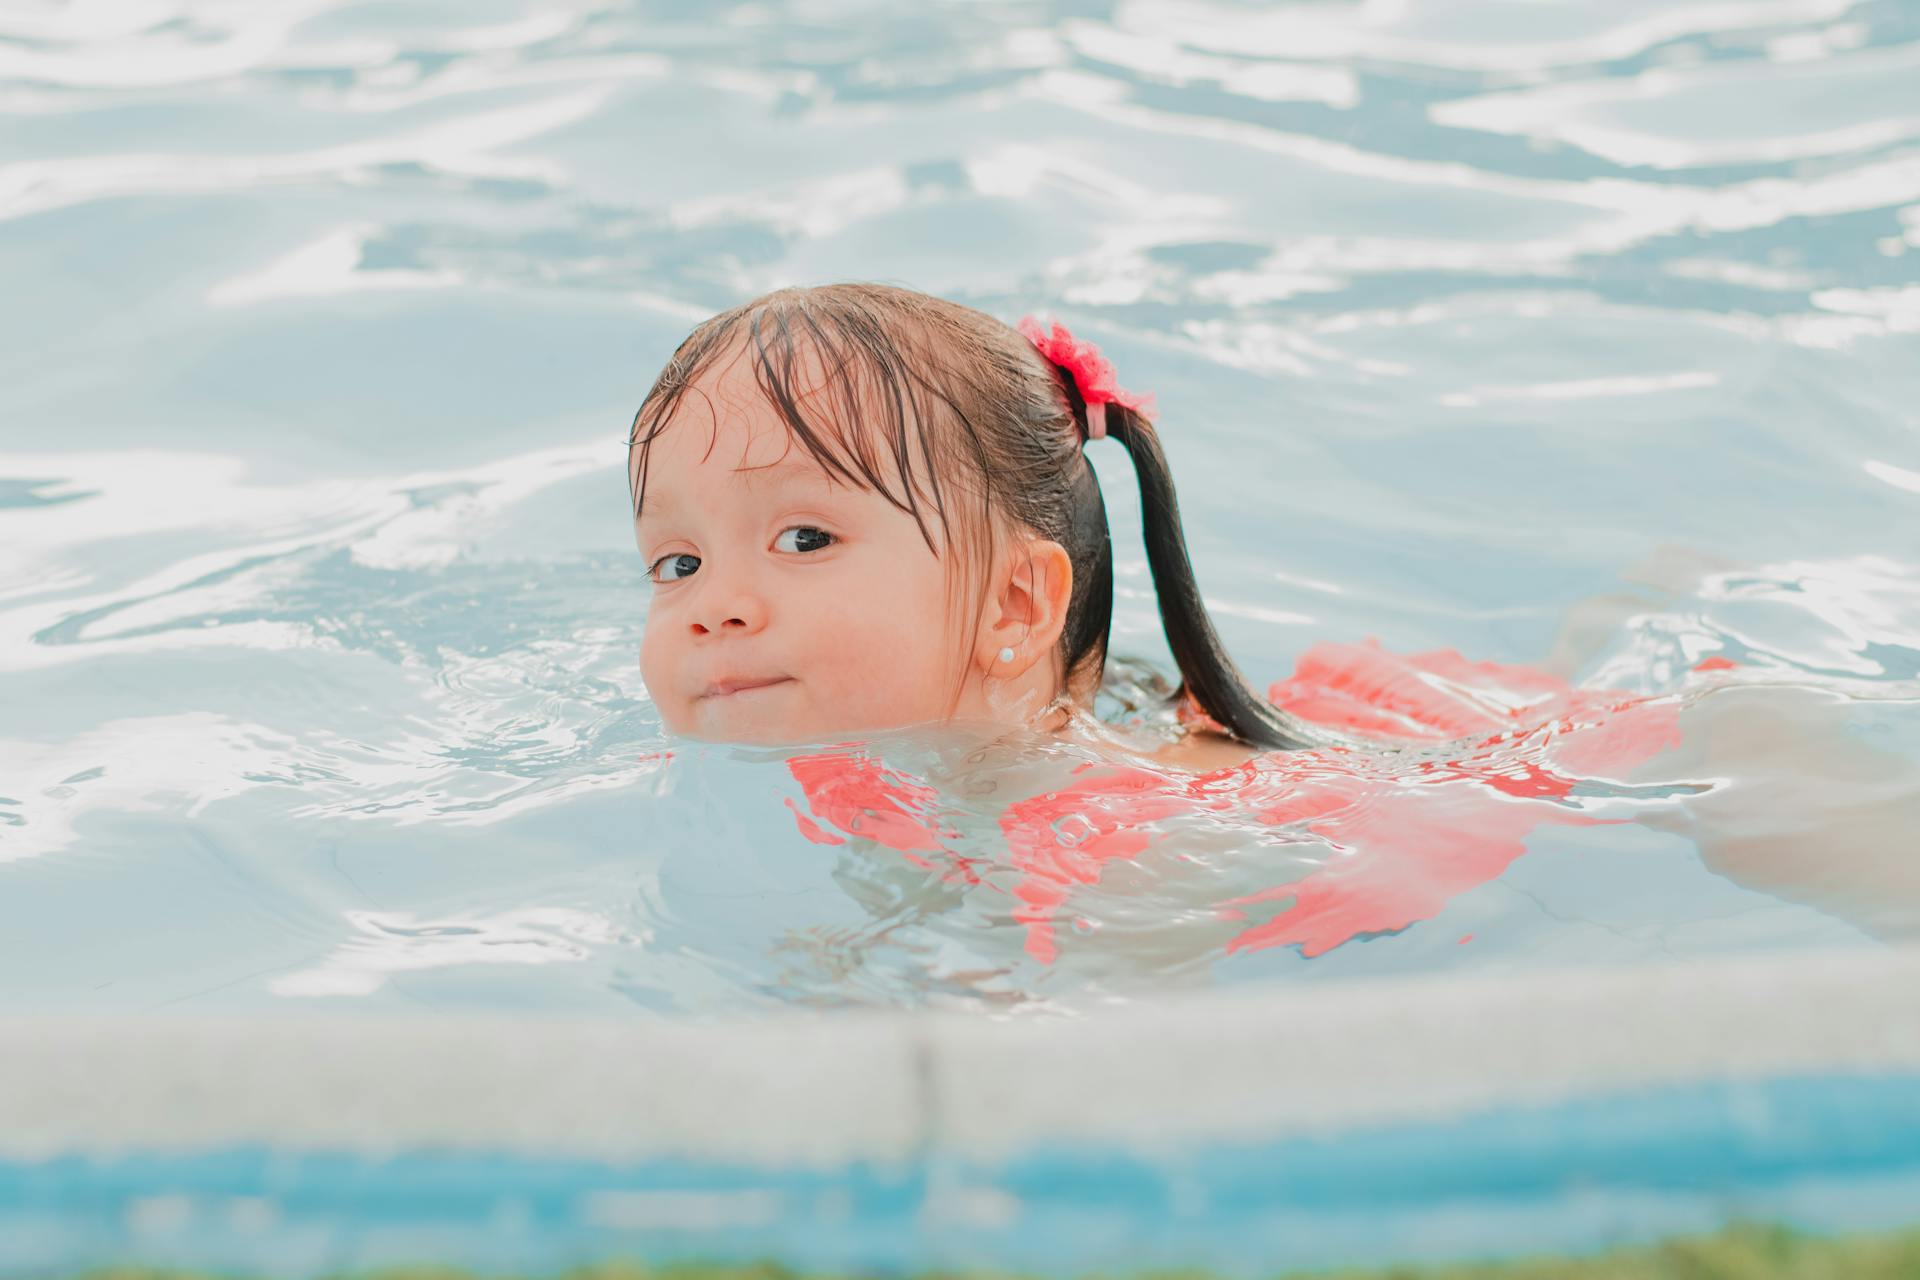 A little girl in a swimming pool | Source: Unsplash